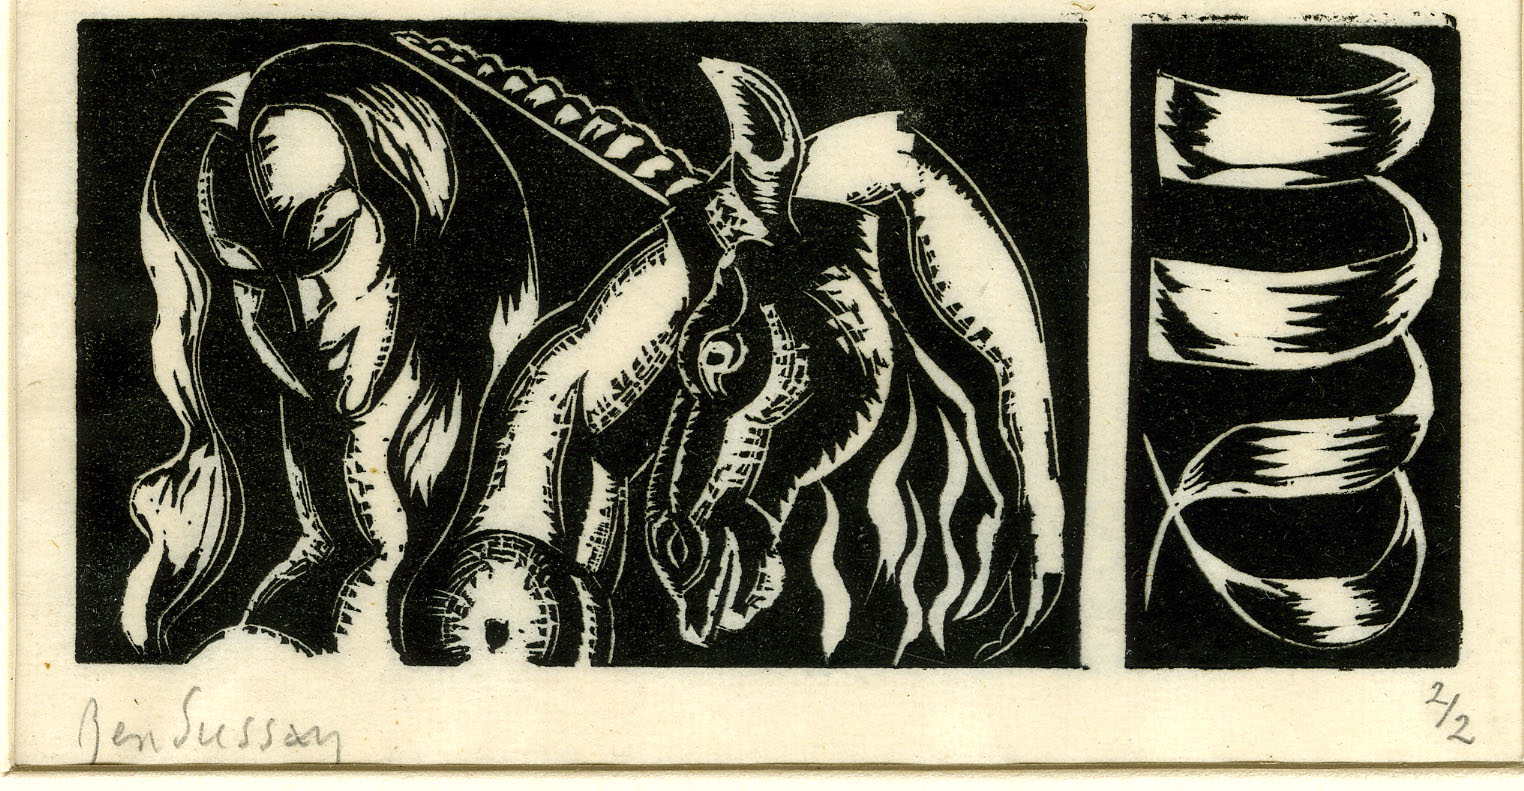 Virgo (from the series 'Les Signes Zodiaques') (1922)